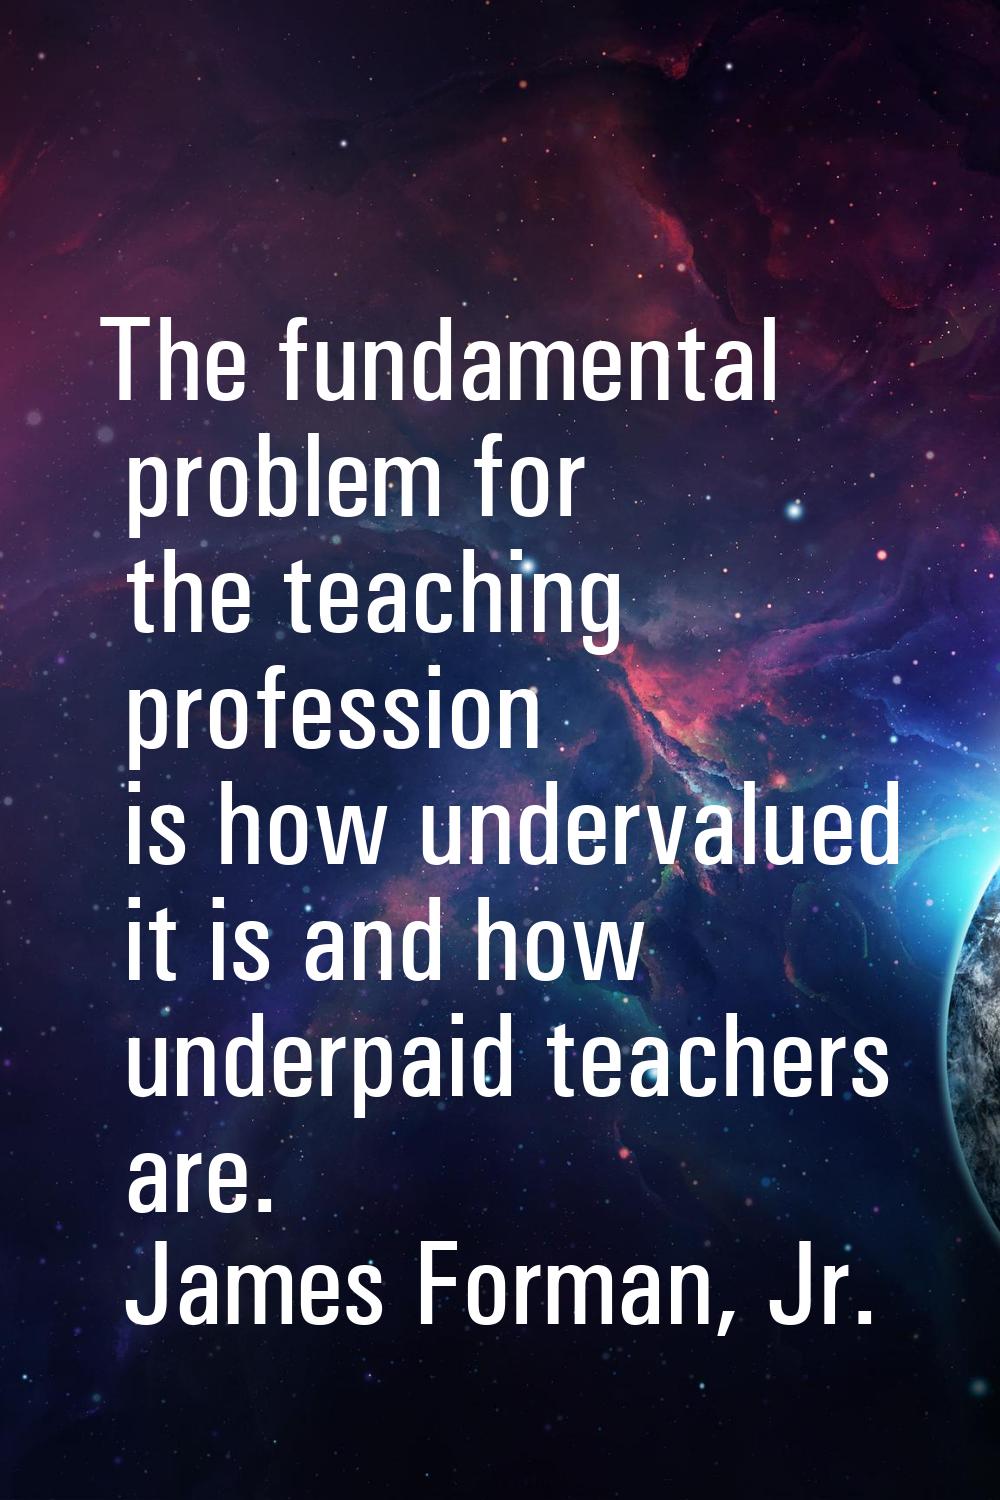 The fundamental problem for the teaching profession is how undervalued it is and how underpaid teac